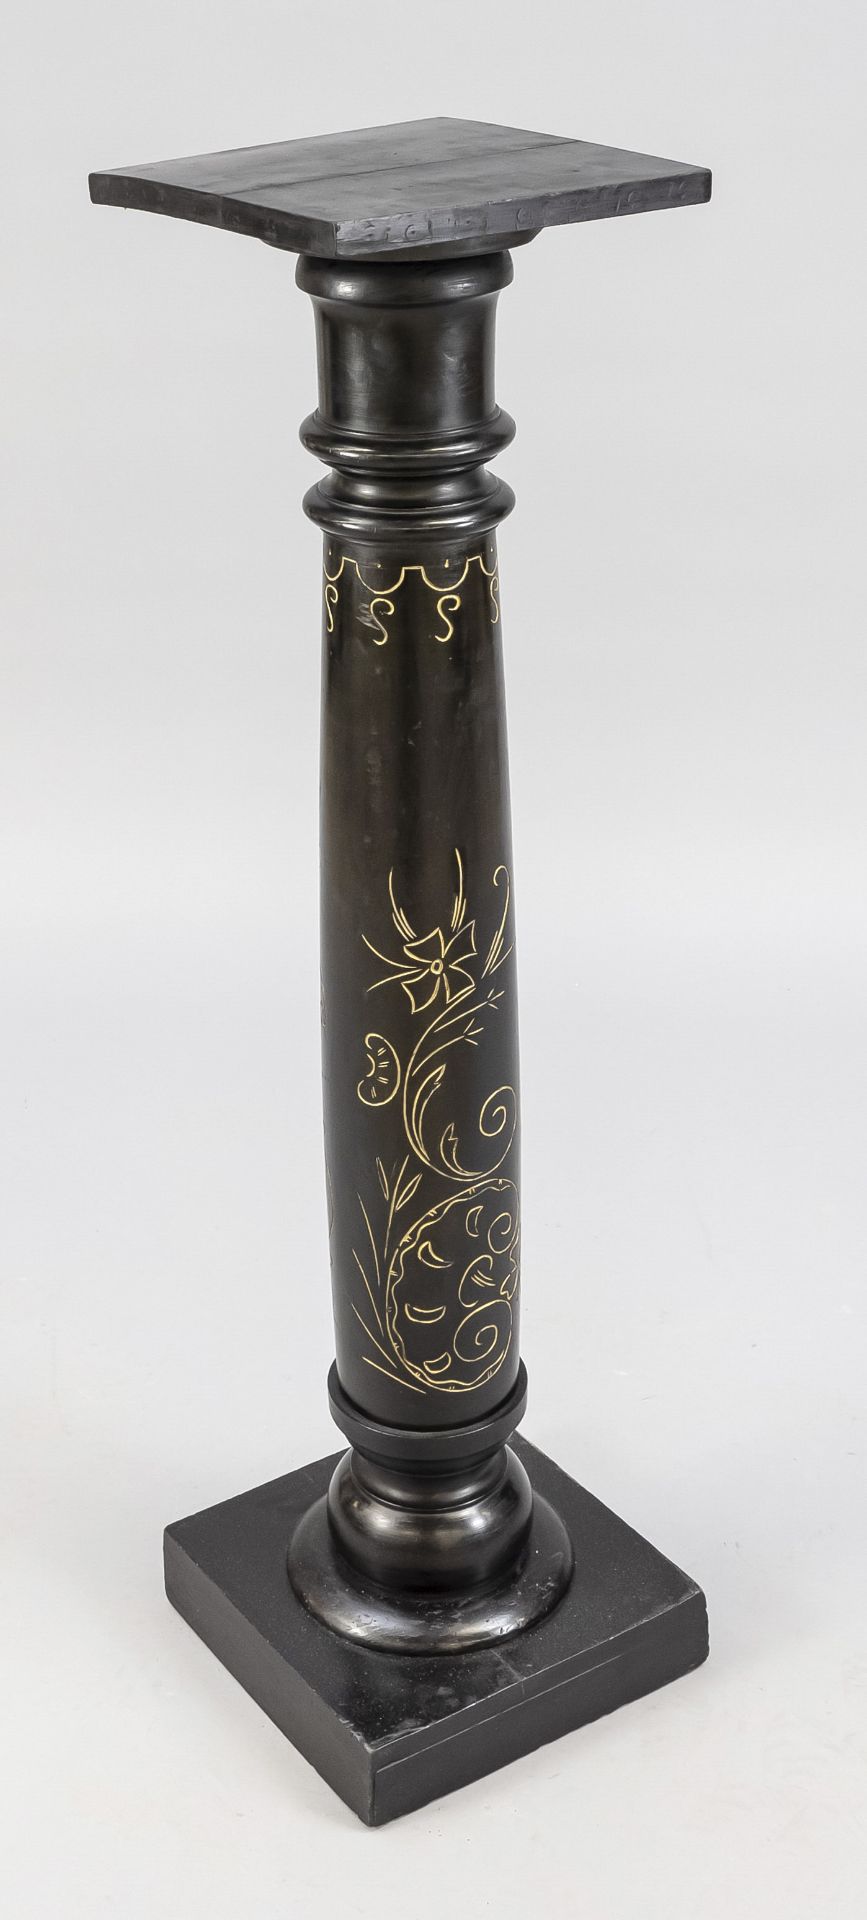 Flower column, end of 19th/beginning of 20th c., wood, black lacquered with cut ornament, h. 108